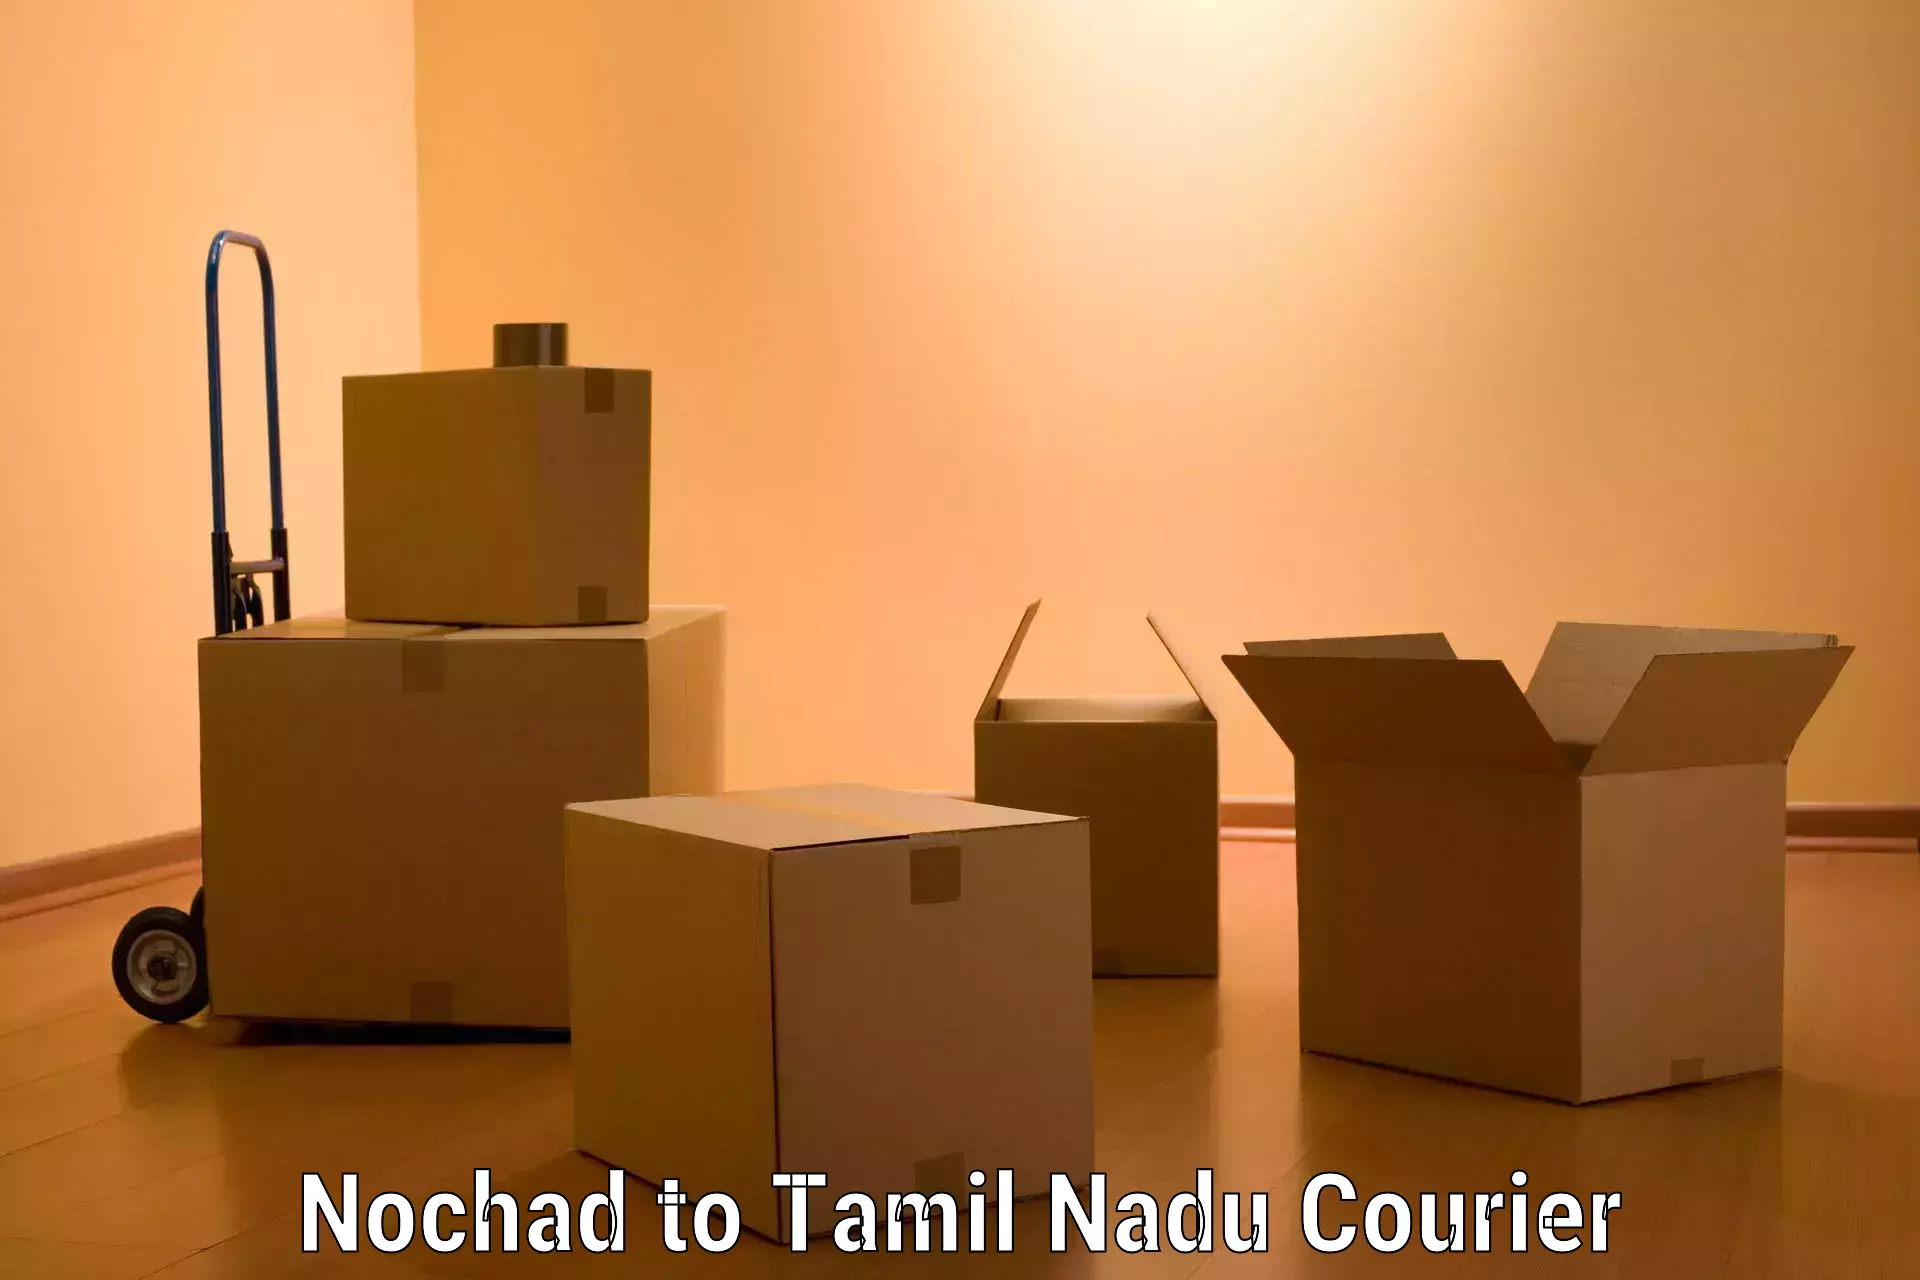 Trusted relocation experts Nochad to Tamil Nadu